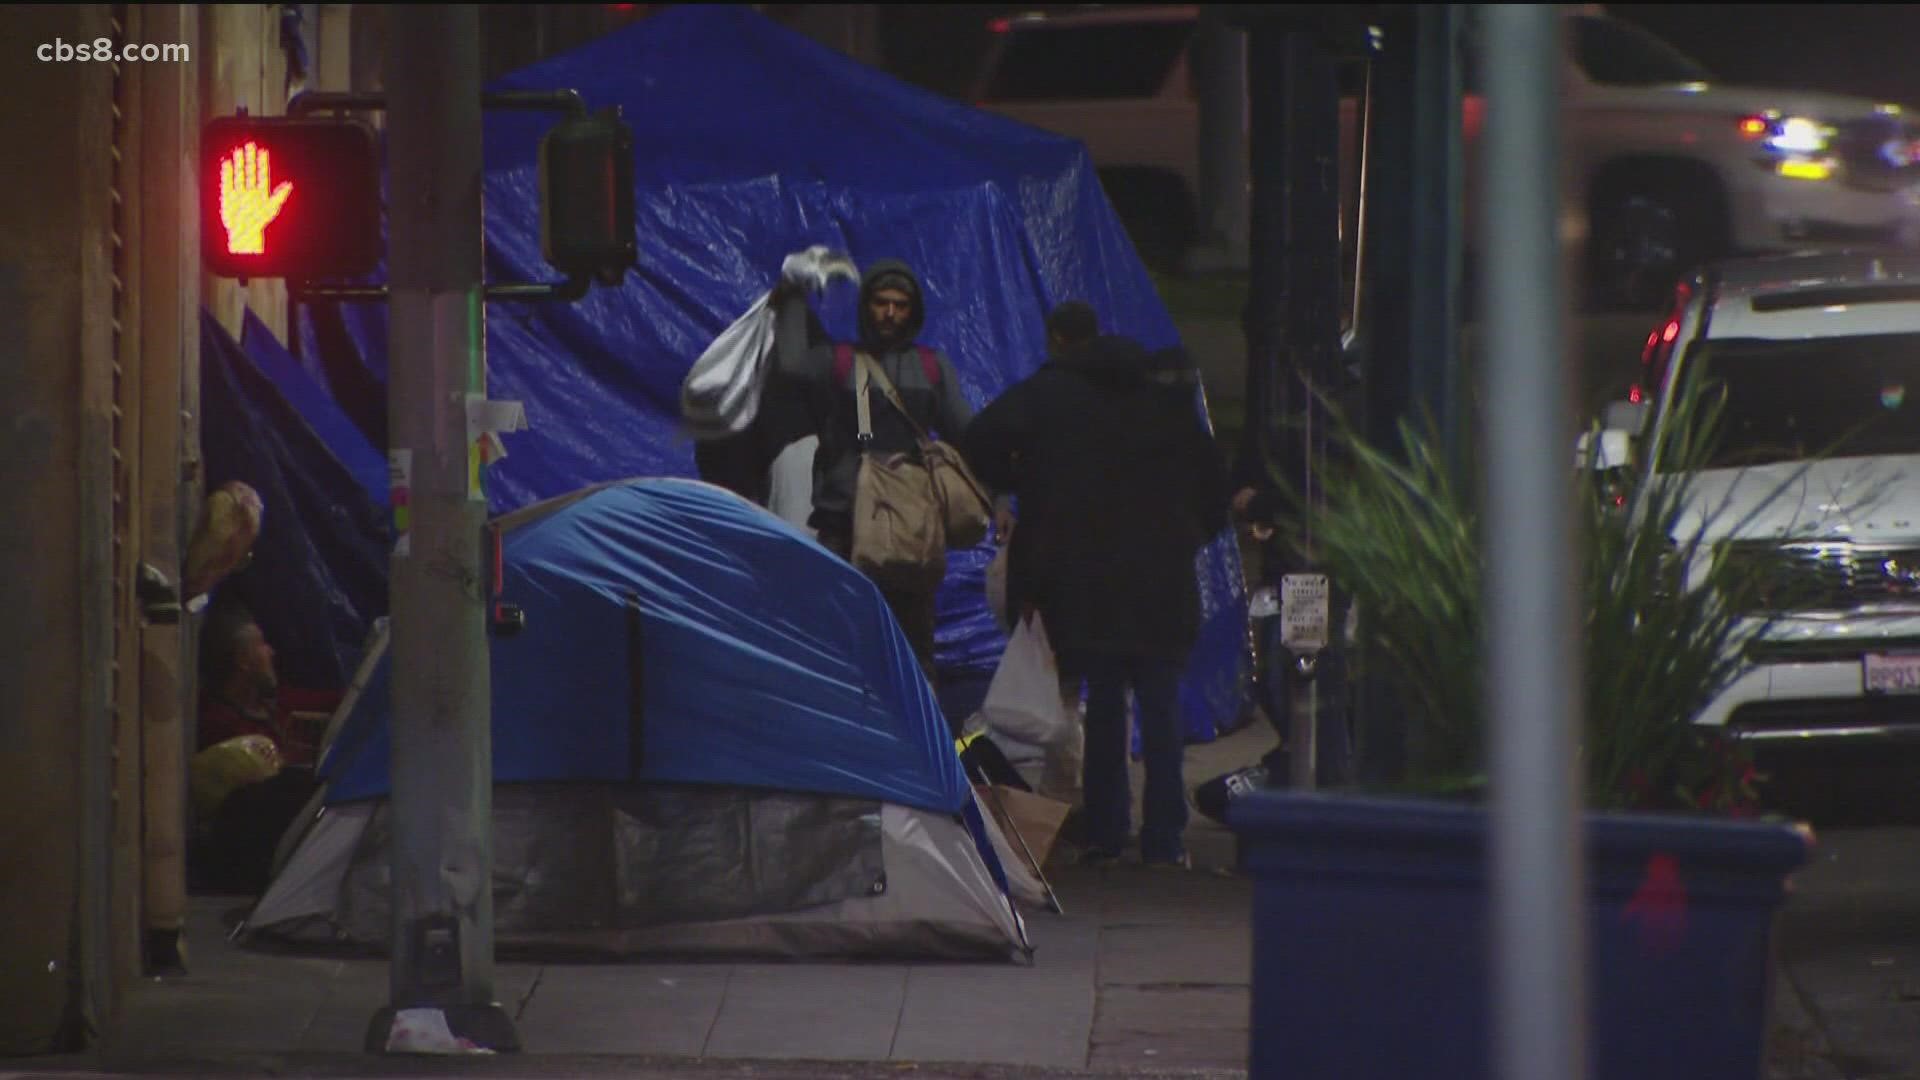 Officials say the cold, wet weather and the latest case surge is heavily impacting those experiencing homelessness in San Diego County.